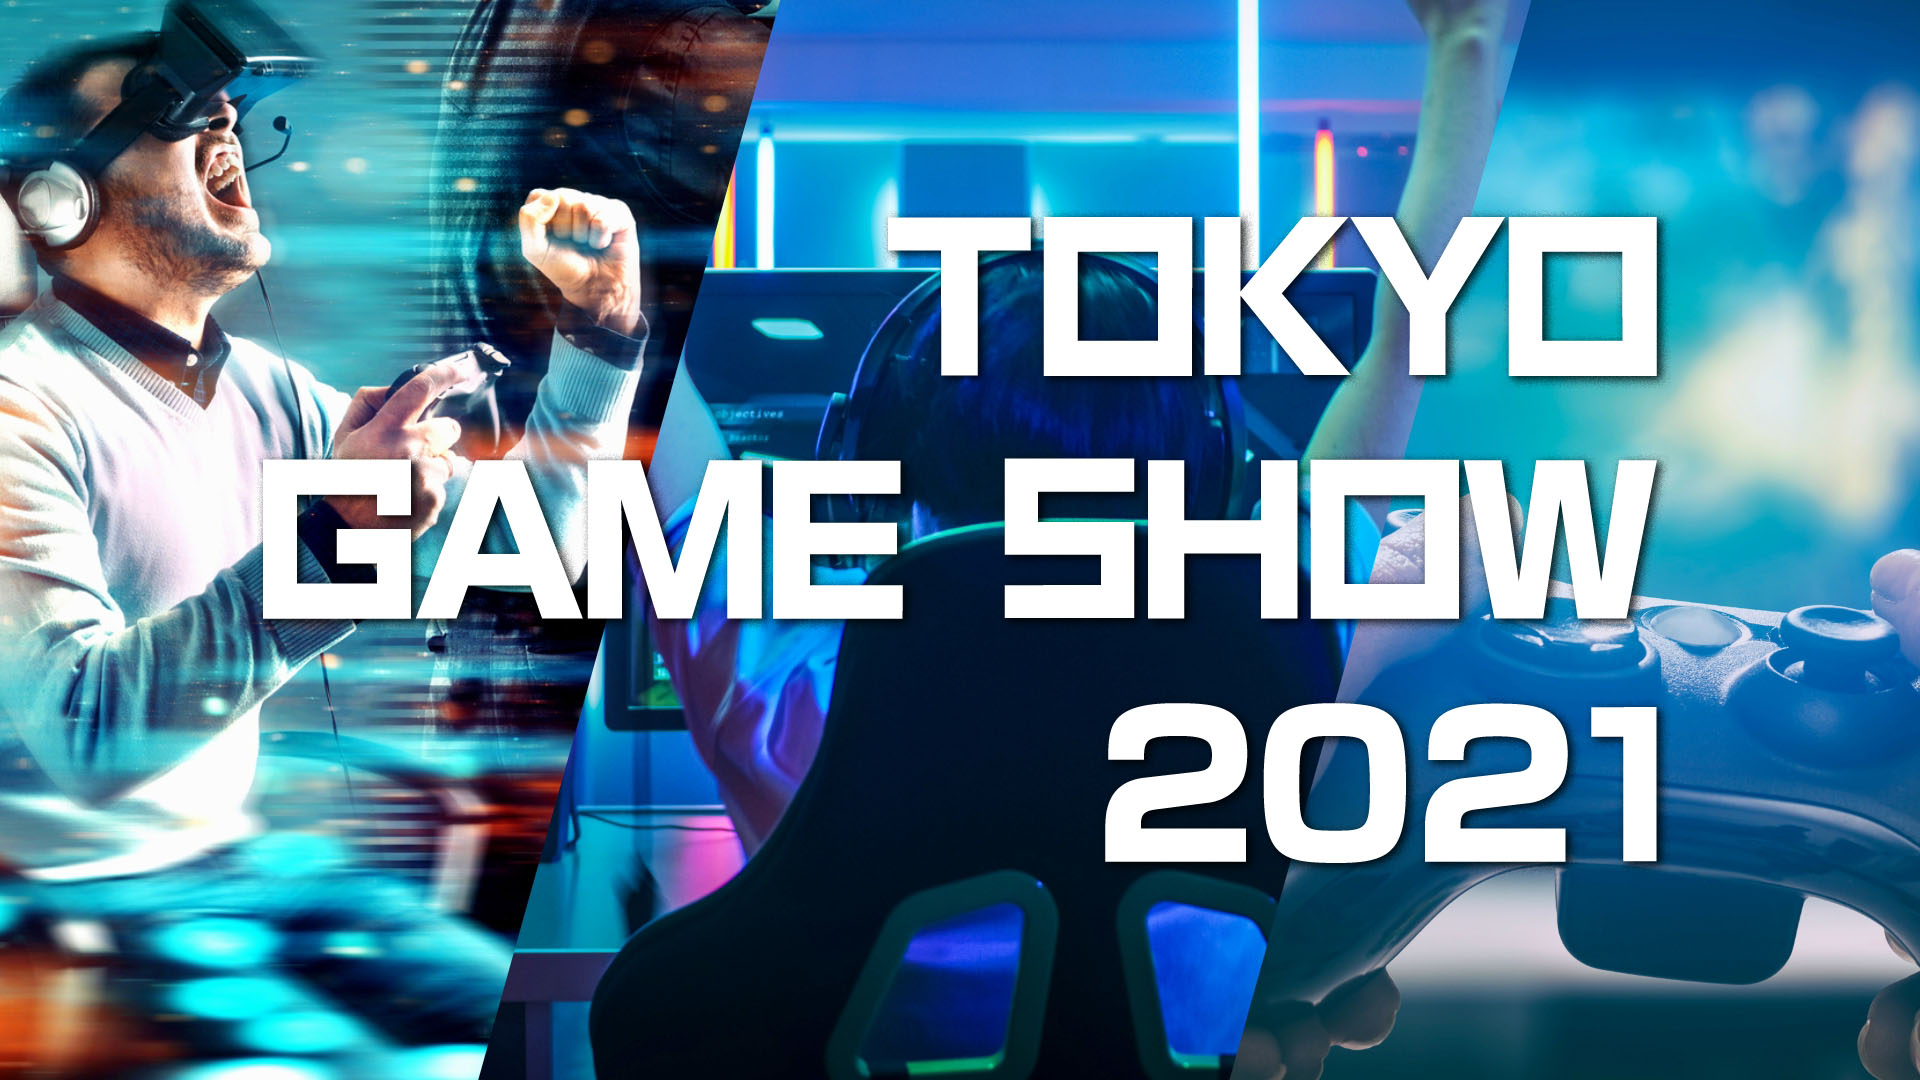 Tokyo Game Show is Online-Only Again for 2021